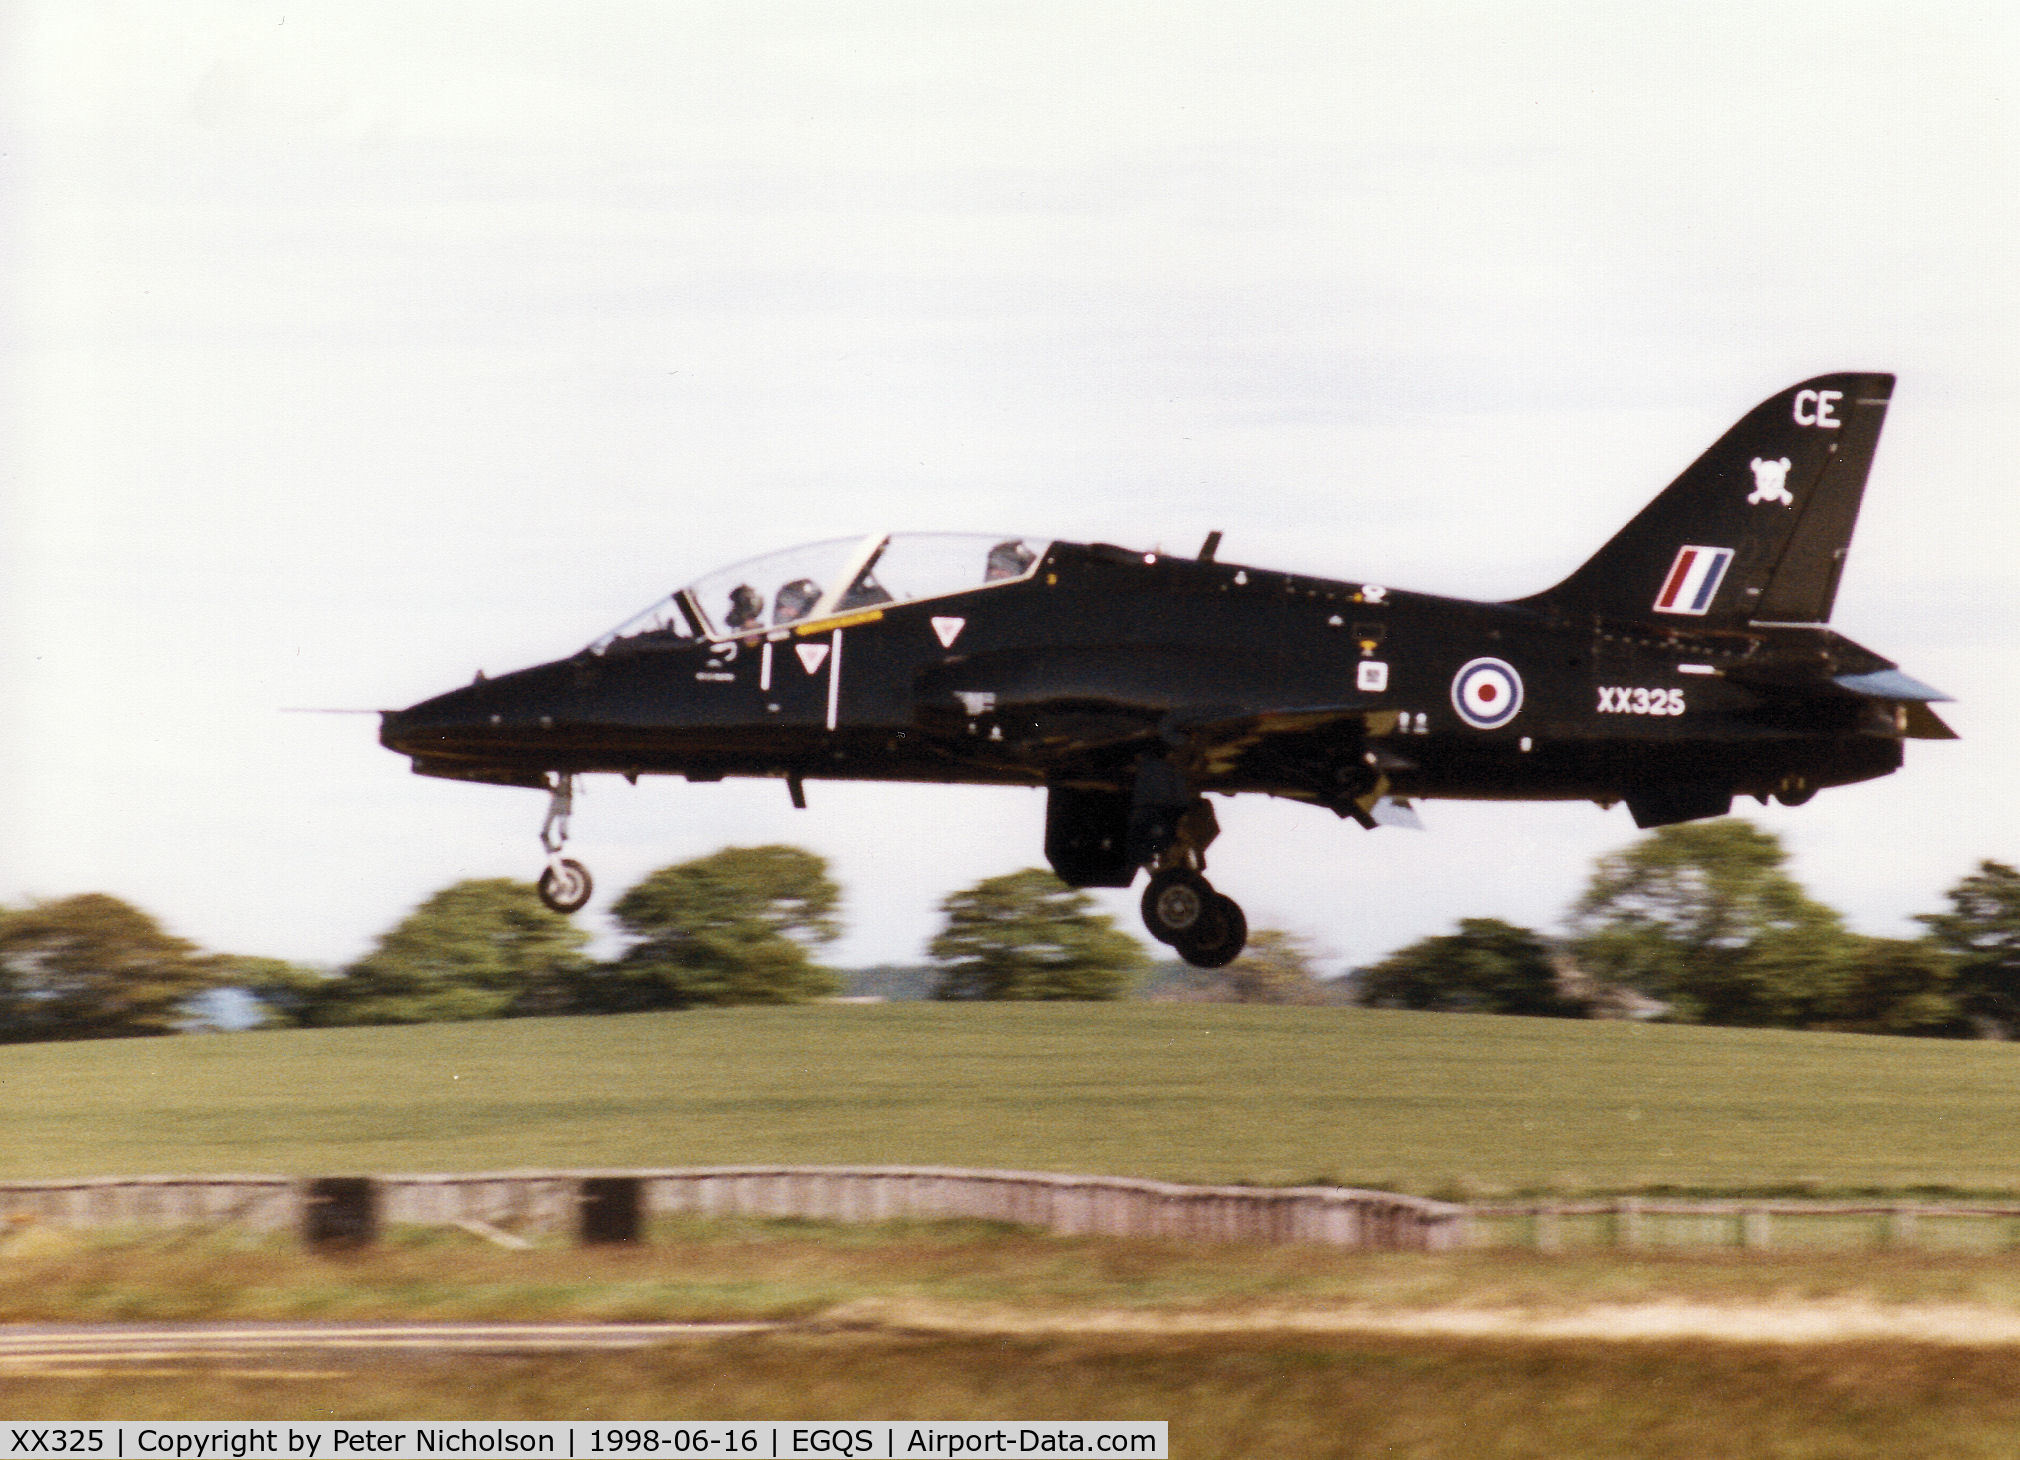 XX325, 1980 Hawker Siddeley Hawk T.1 C/N 169/312150, Hawk T.1A, callsign Polecat 1, of RAF Leeming's 100 Squadron landing on Runway 05 at RAF Lossiemouth during the 1998 Joint Maritime Course.